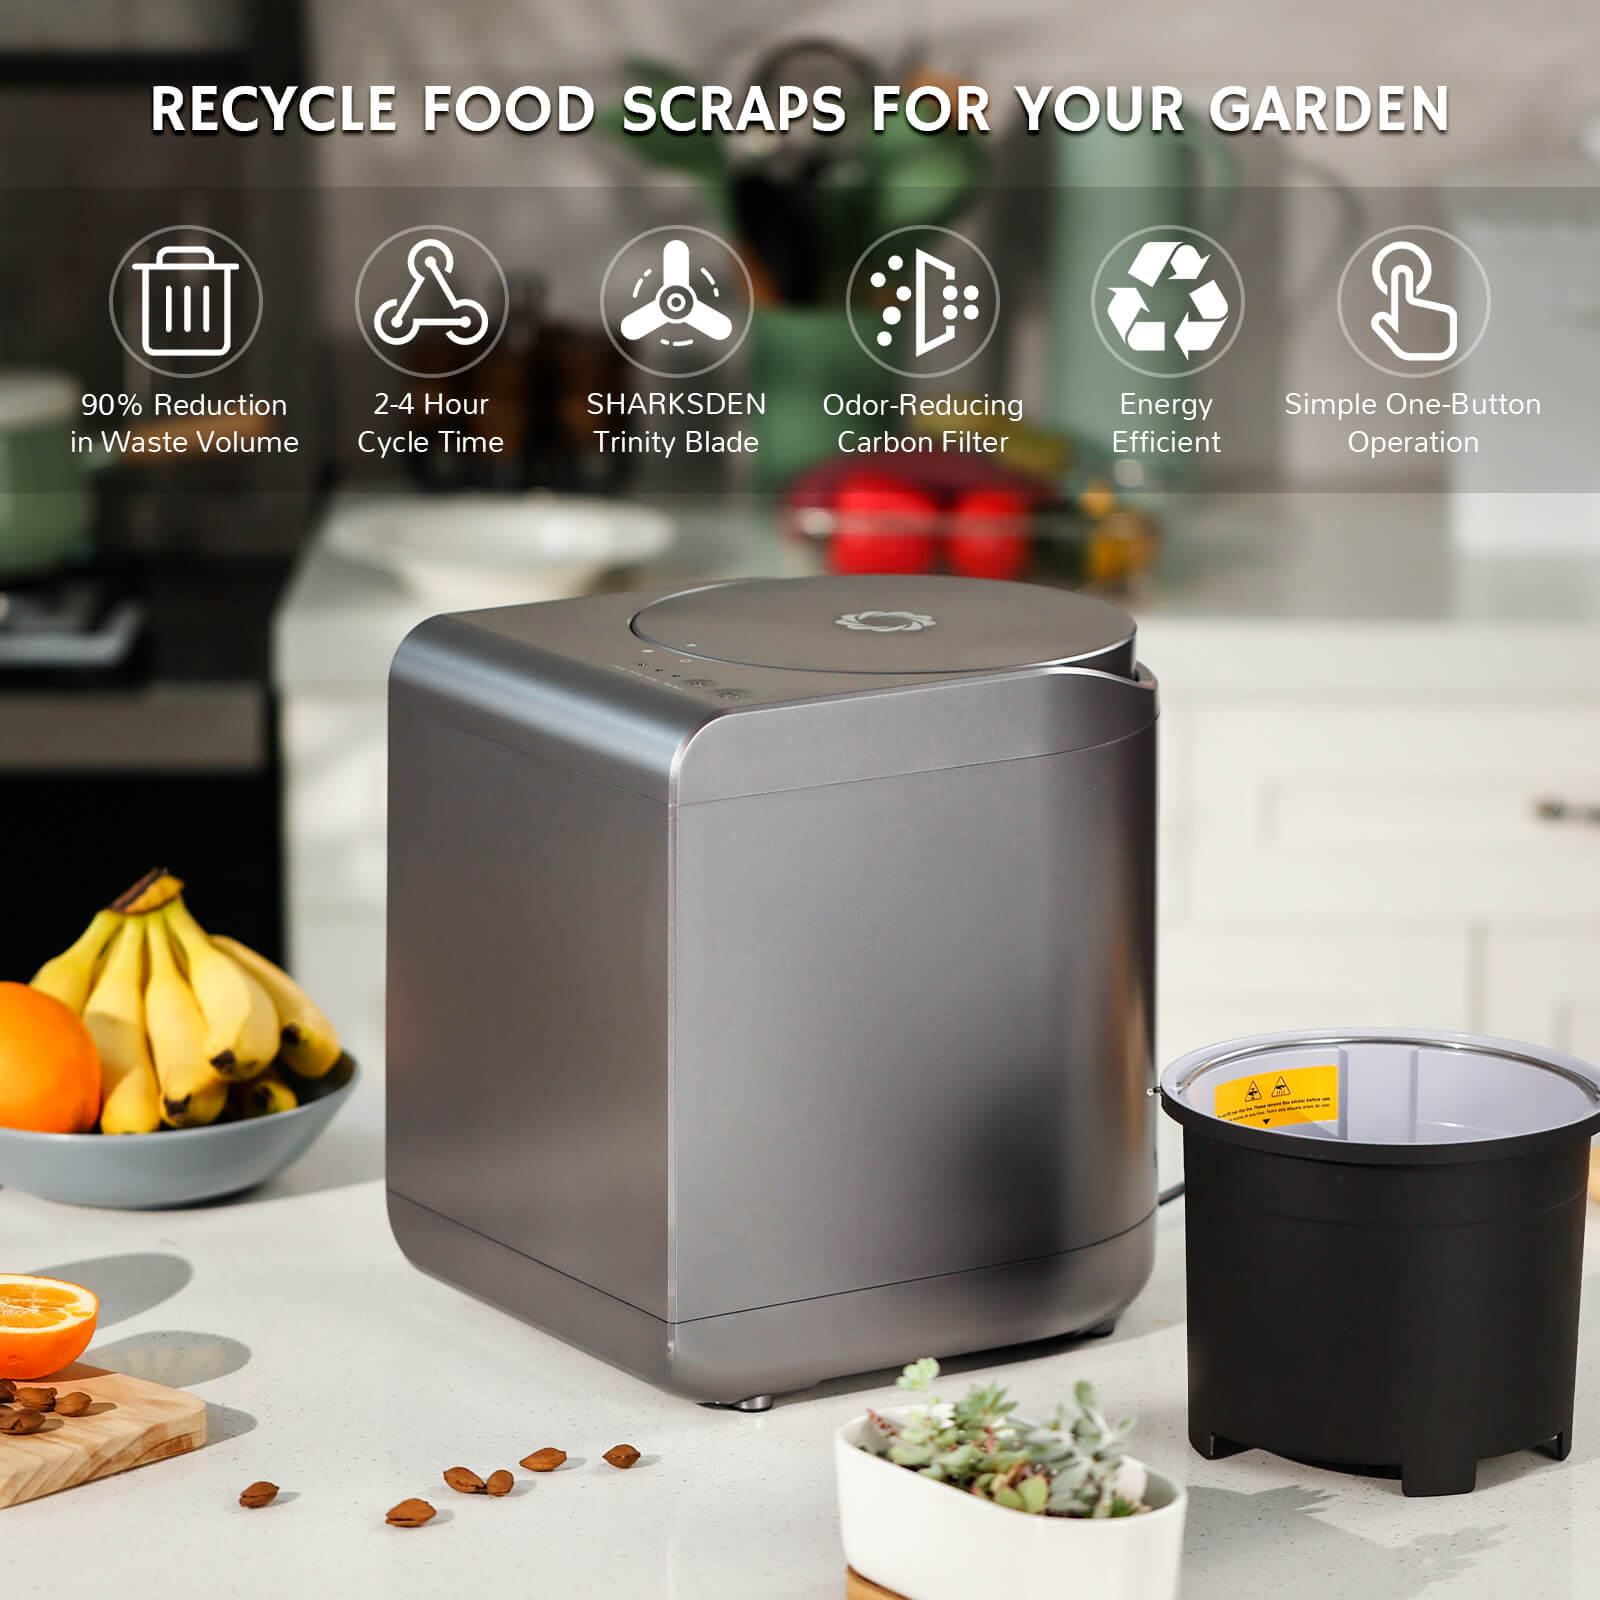 Airthereal Revive Electric Kitchen Composter Benefits of recycling food scraps